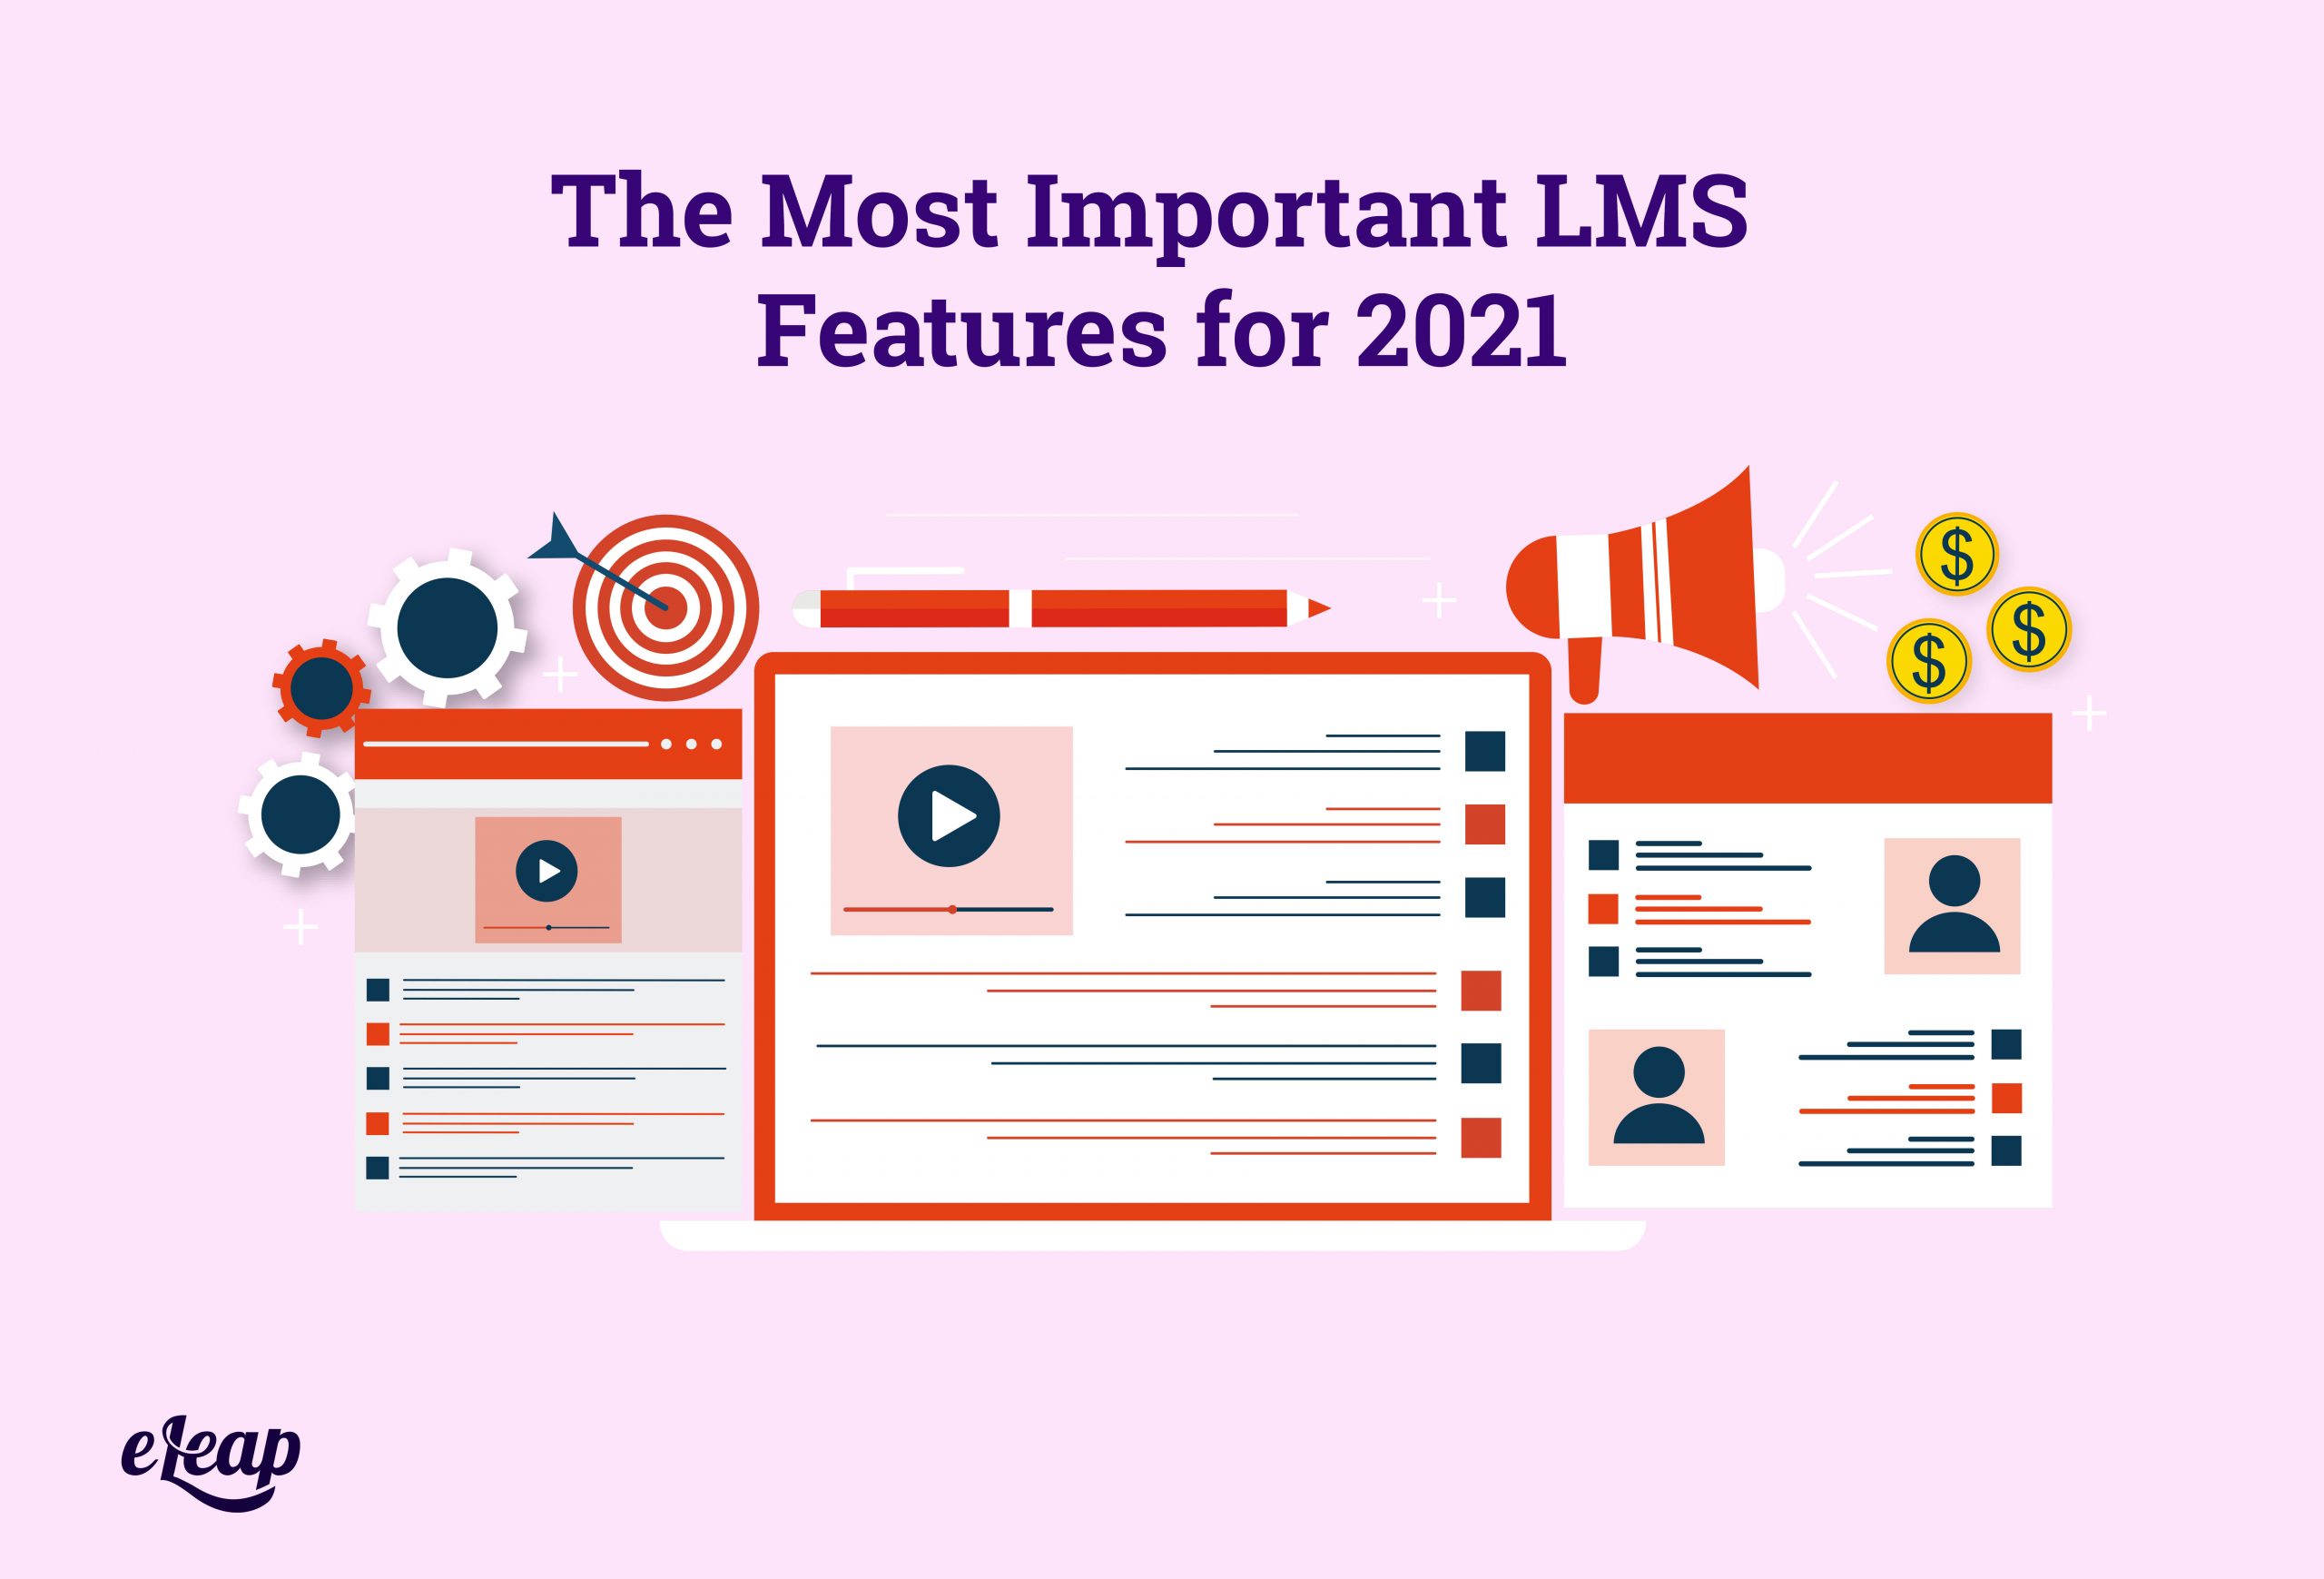 The Most Important LMS Features for 2021